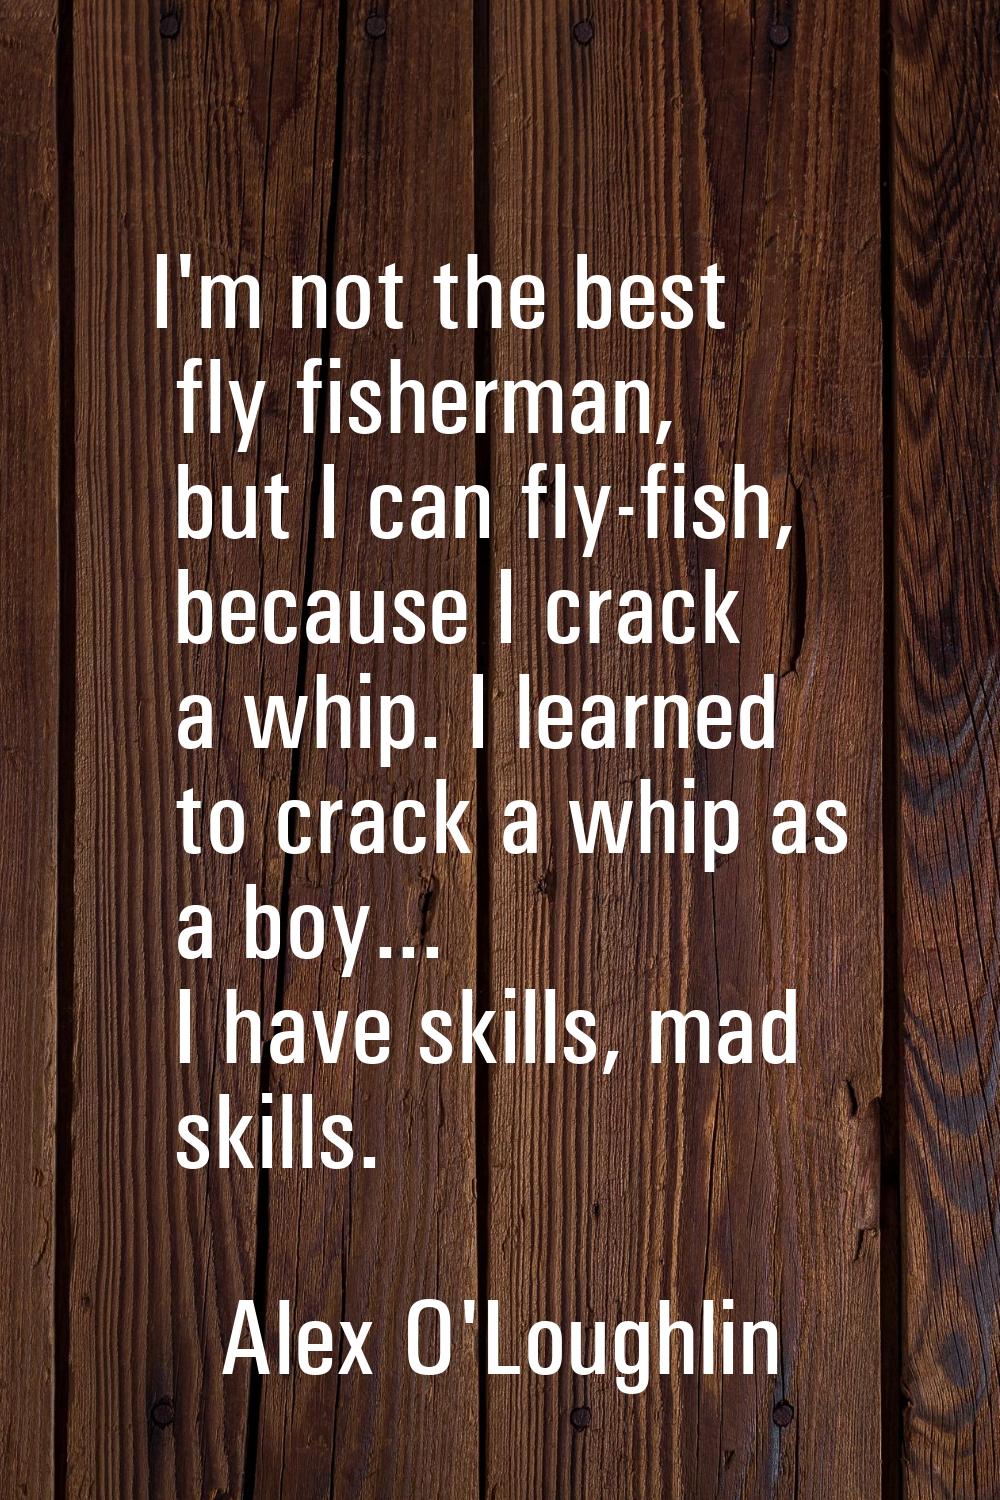 I'm not the best fly fisherman, but I can fly-fish, because I crack a whip. I learned to crack a wh